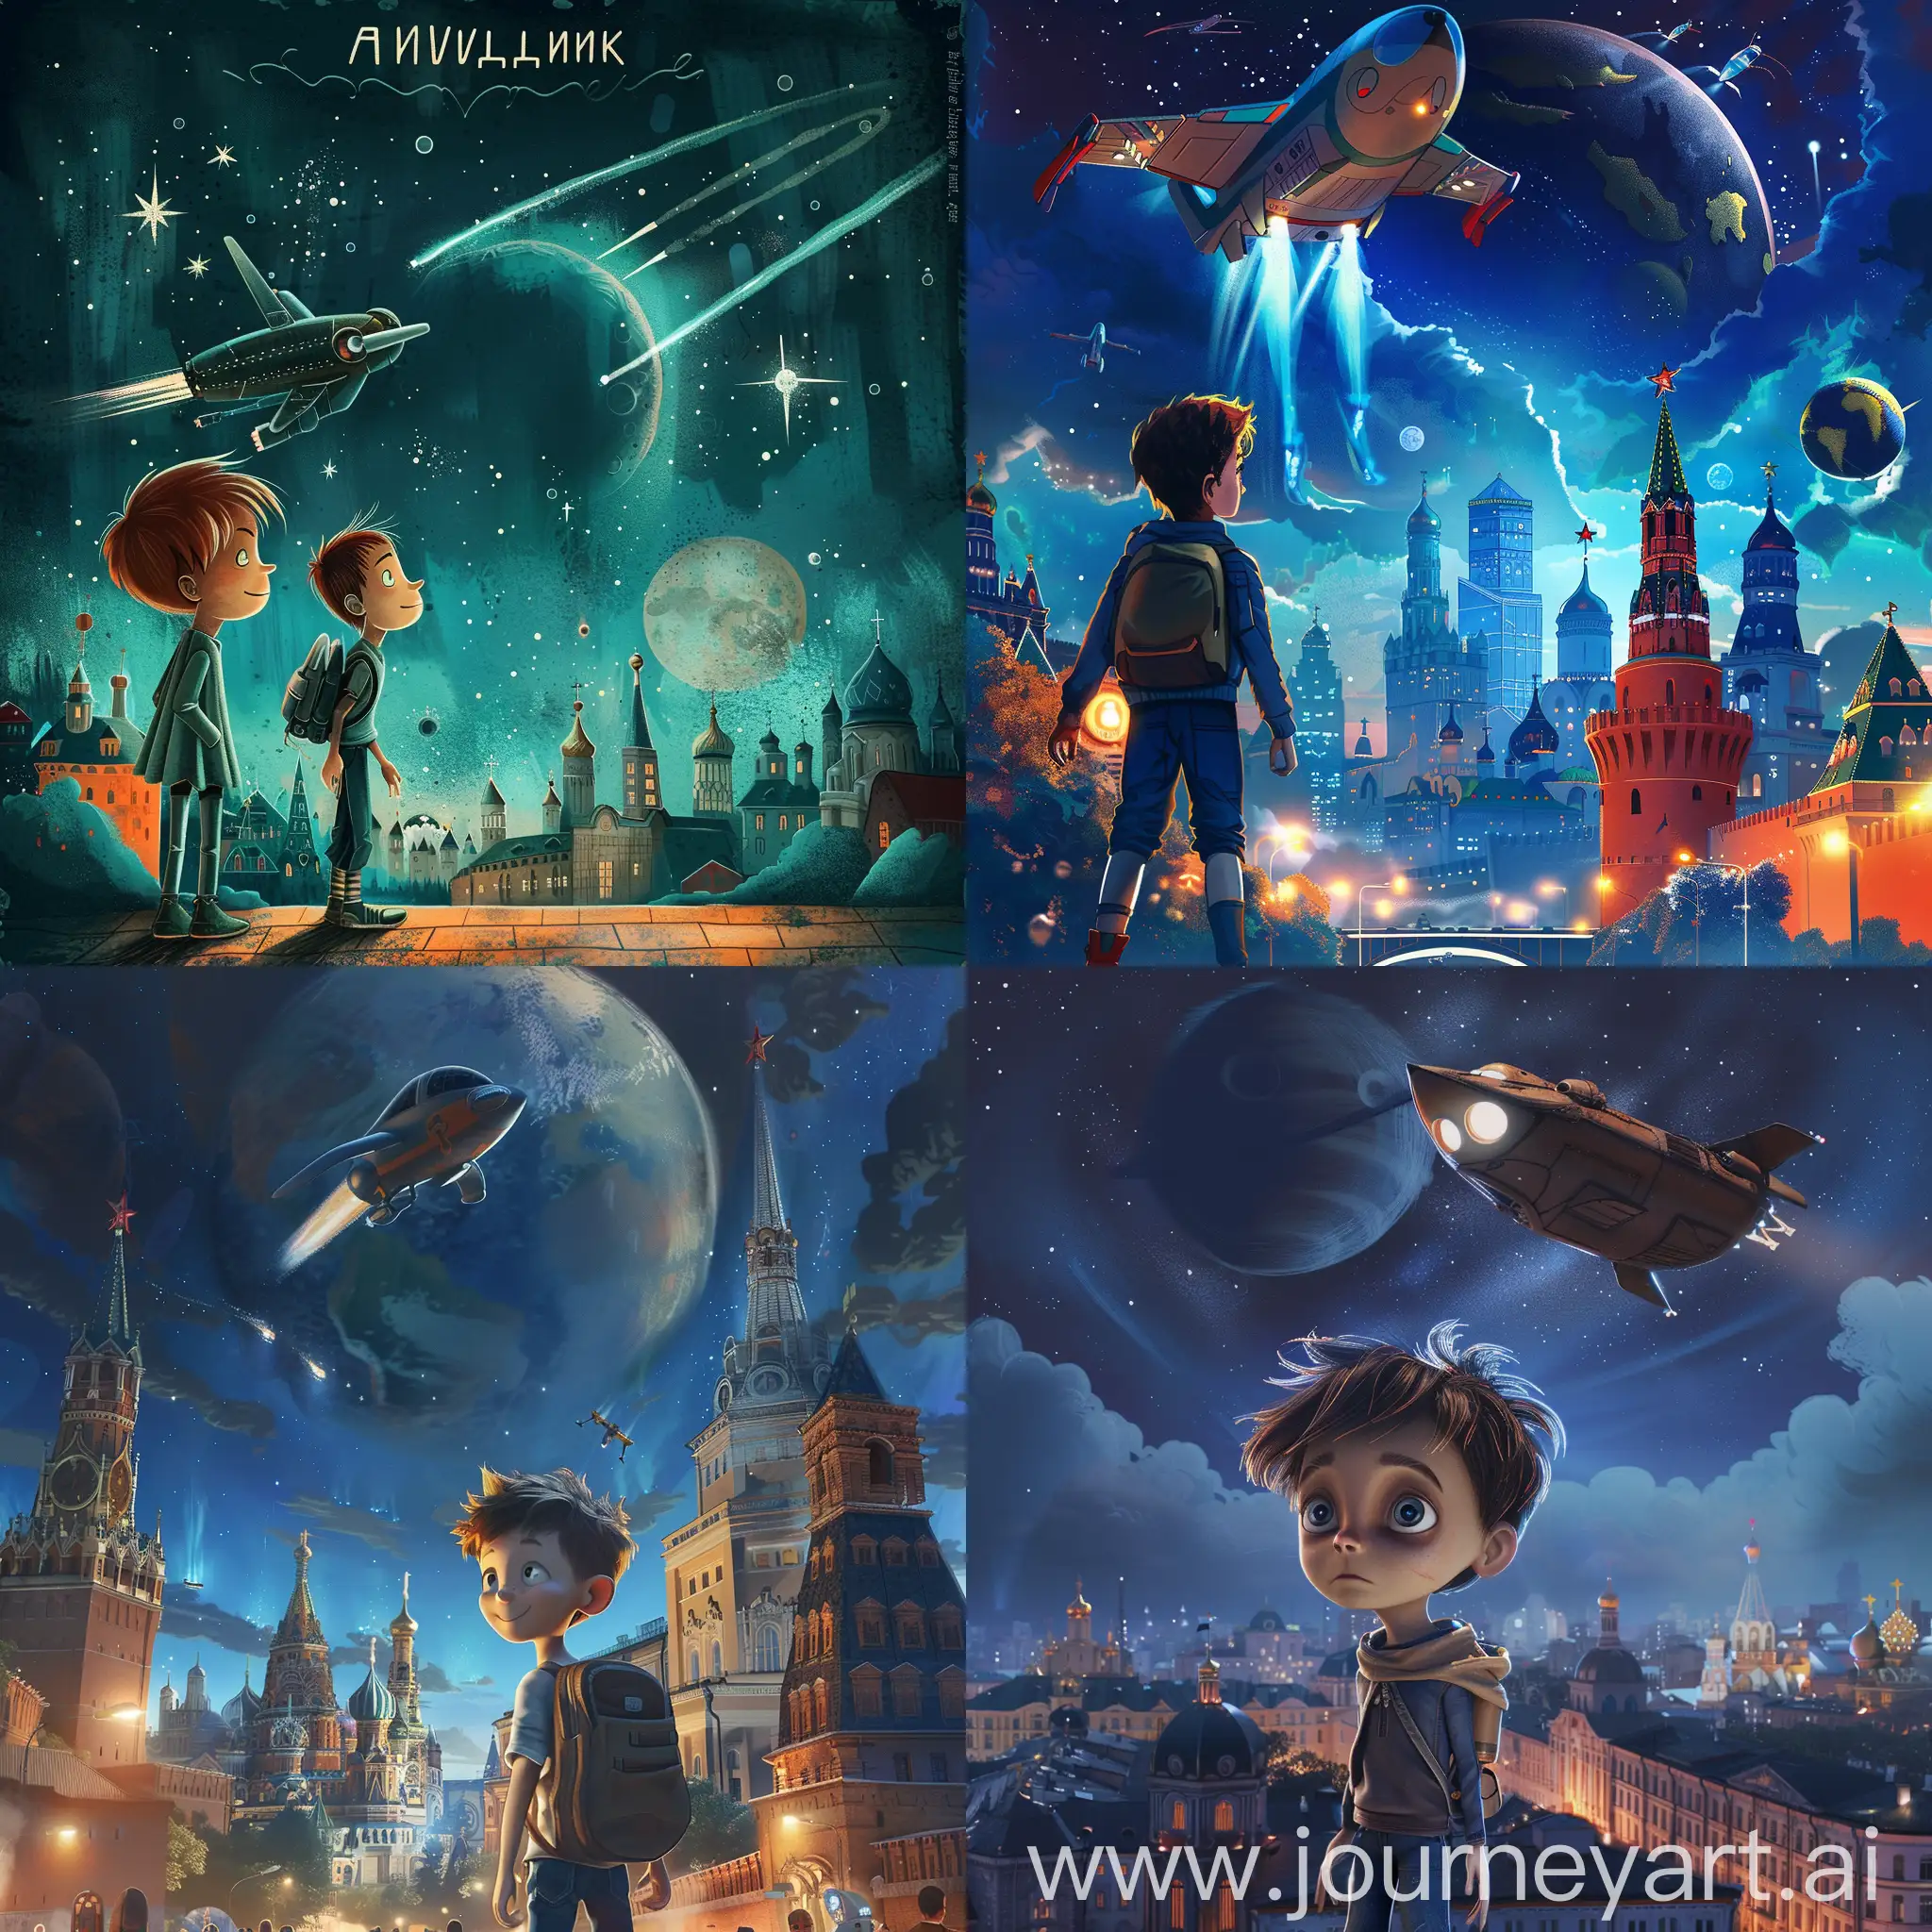 A boy named Vladik has been waiting for 13 years to return to his home planet Angeline while on Earth. His best friend flies to him on a spaceship and stays with him. They go to school in Moscow together at night